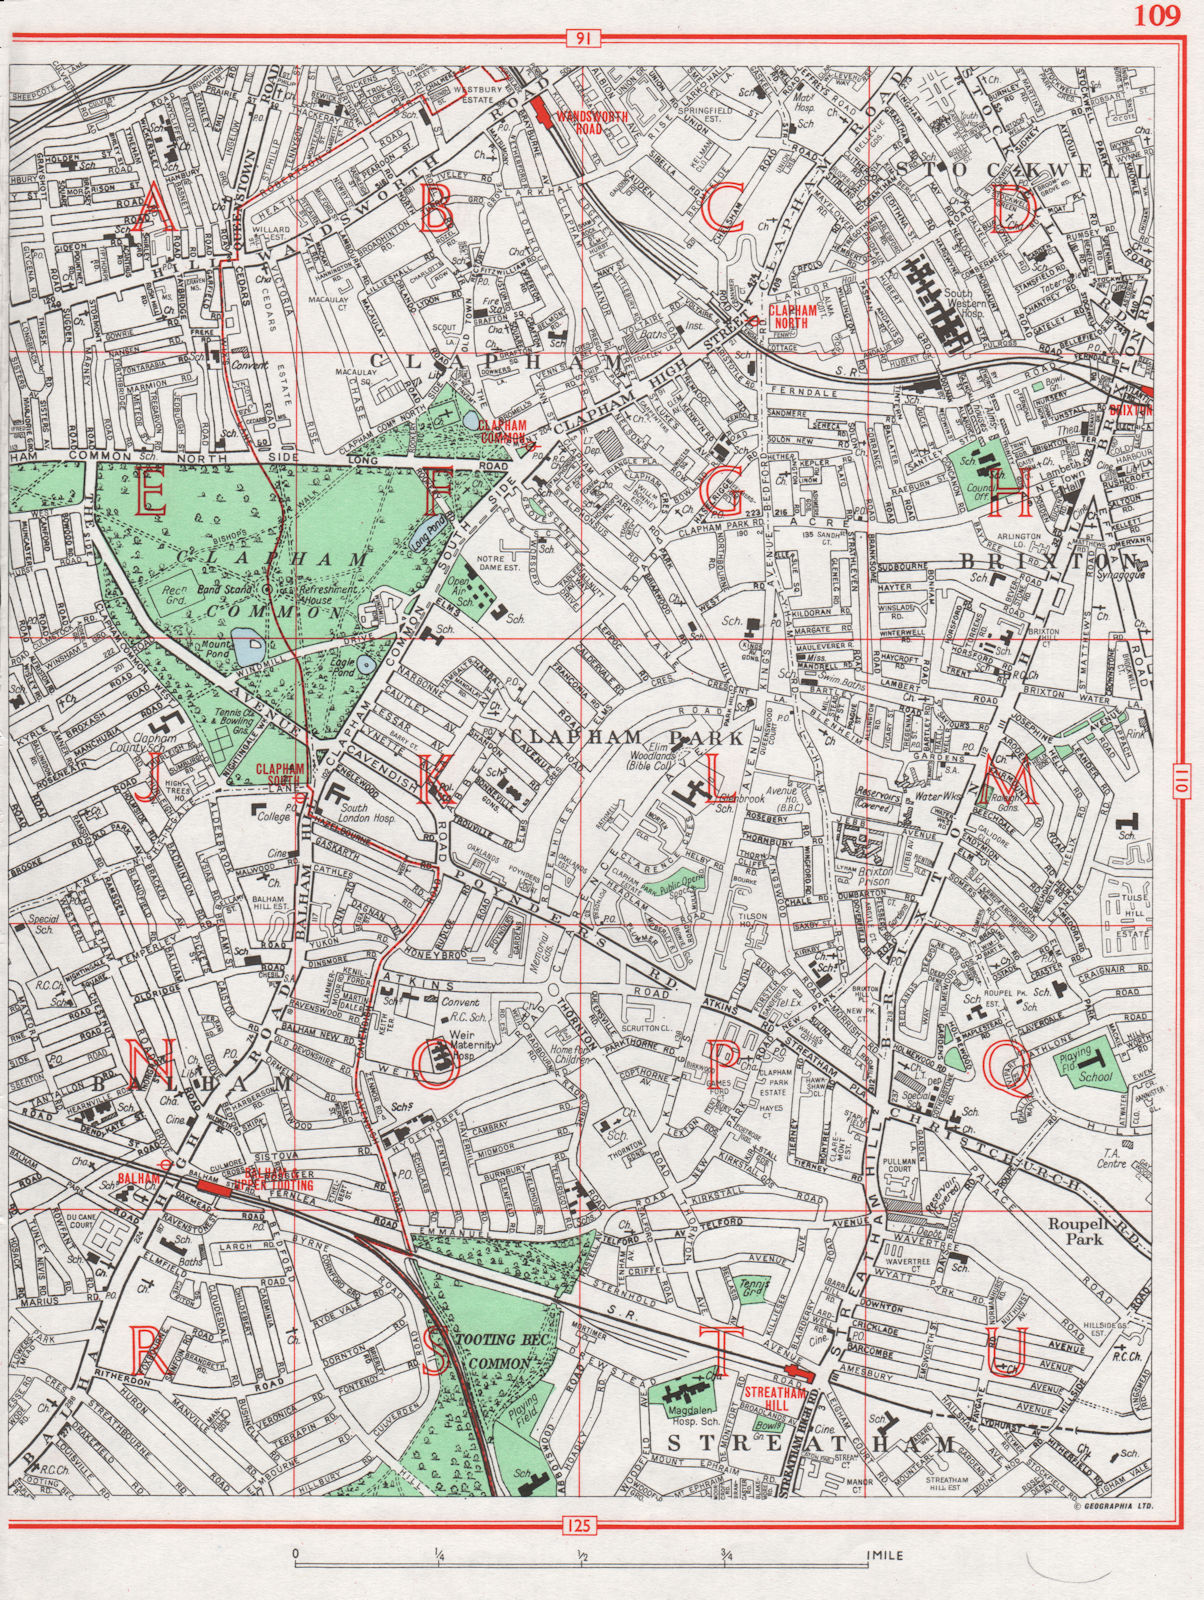 Associate Product CLAPHAM COMMON. Stockwell Brixton Balham Streatham Tooting 1964 old map